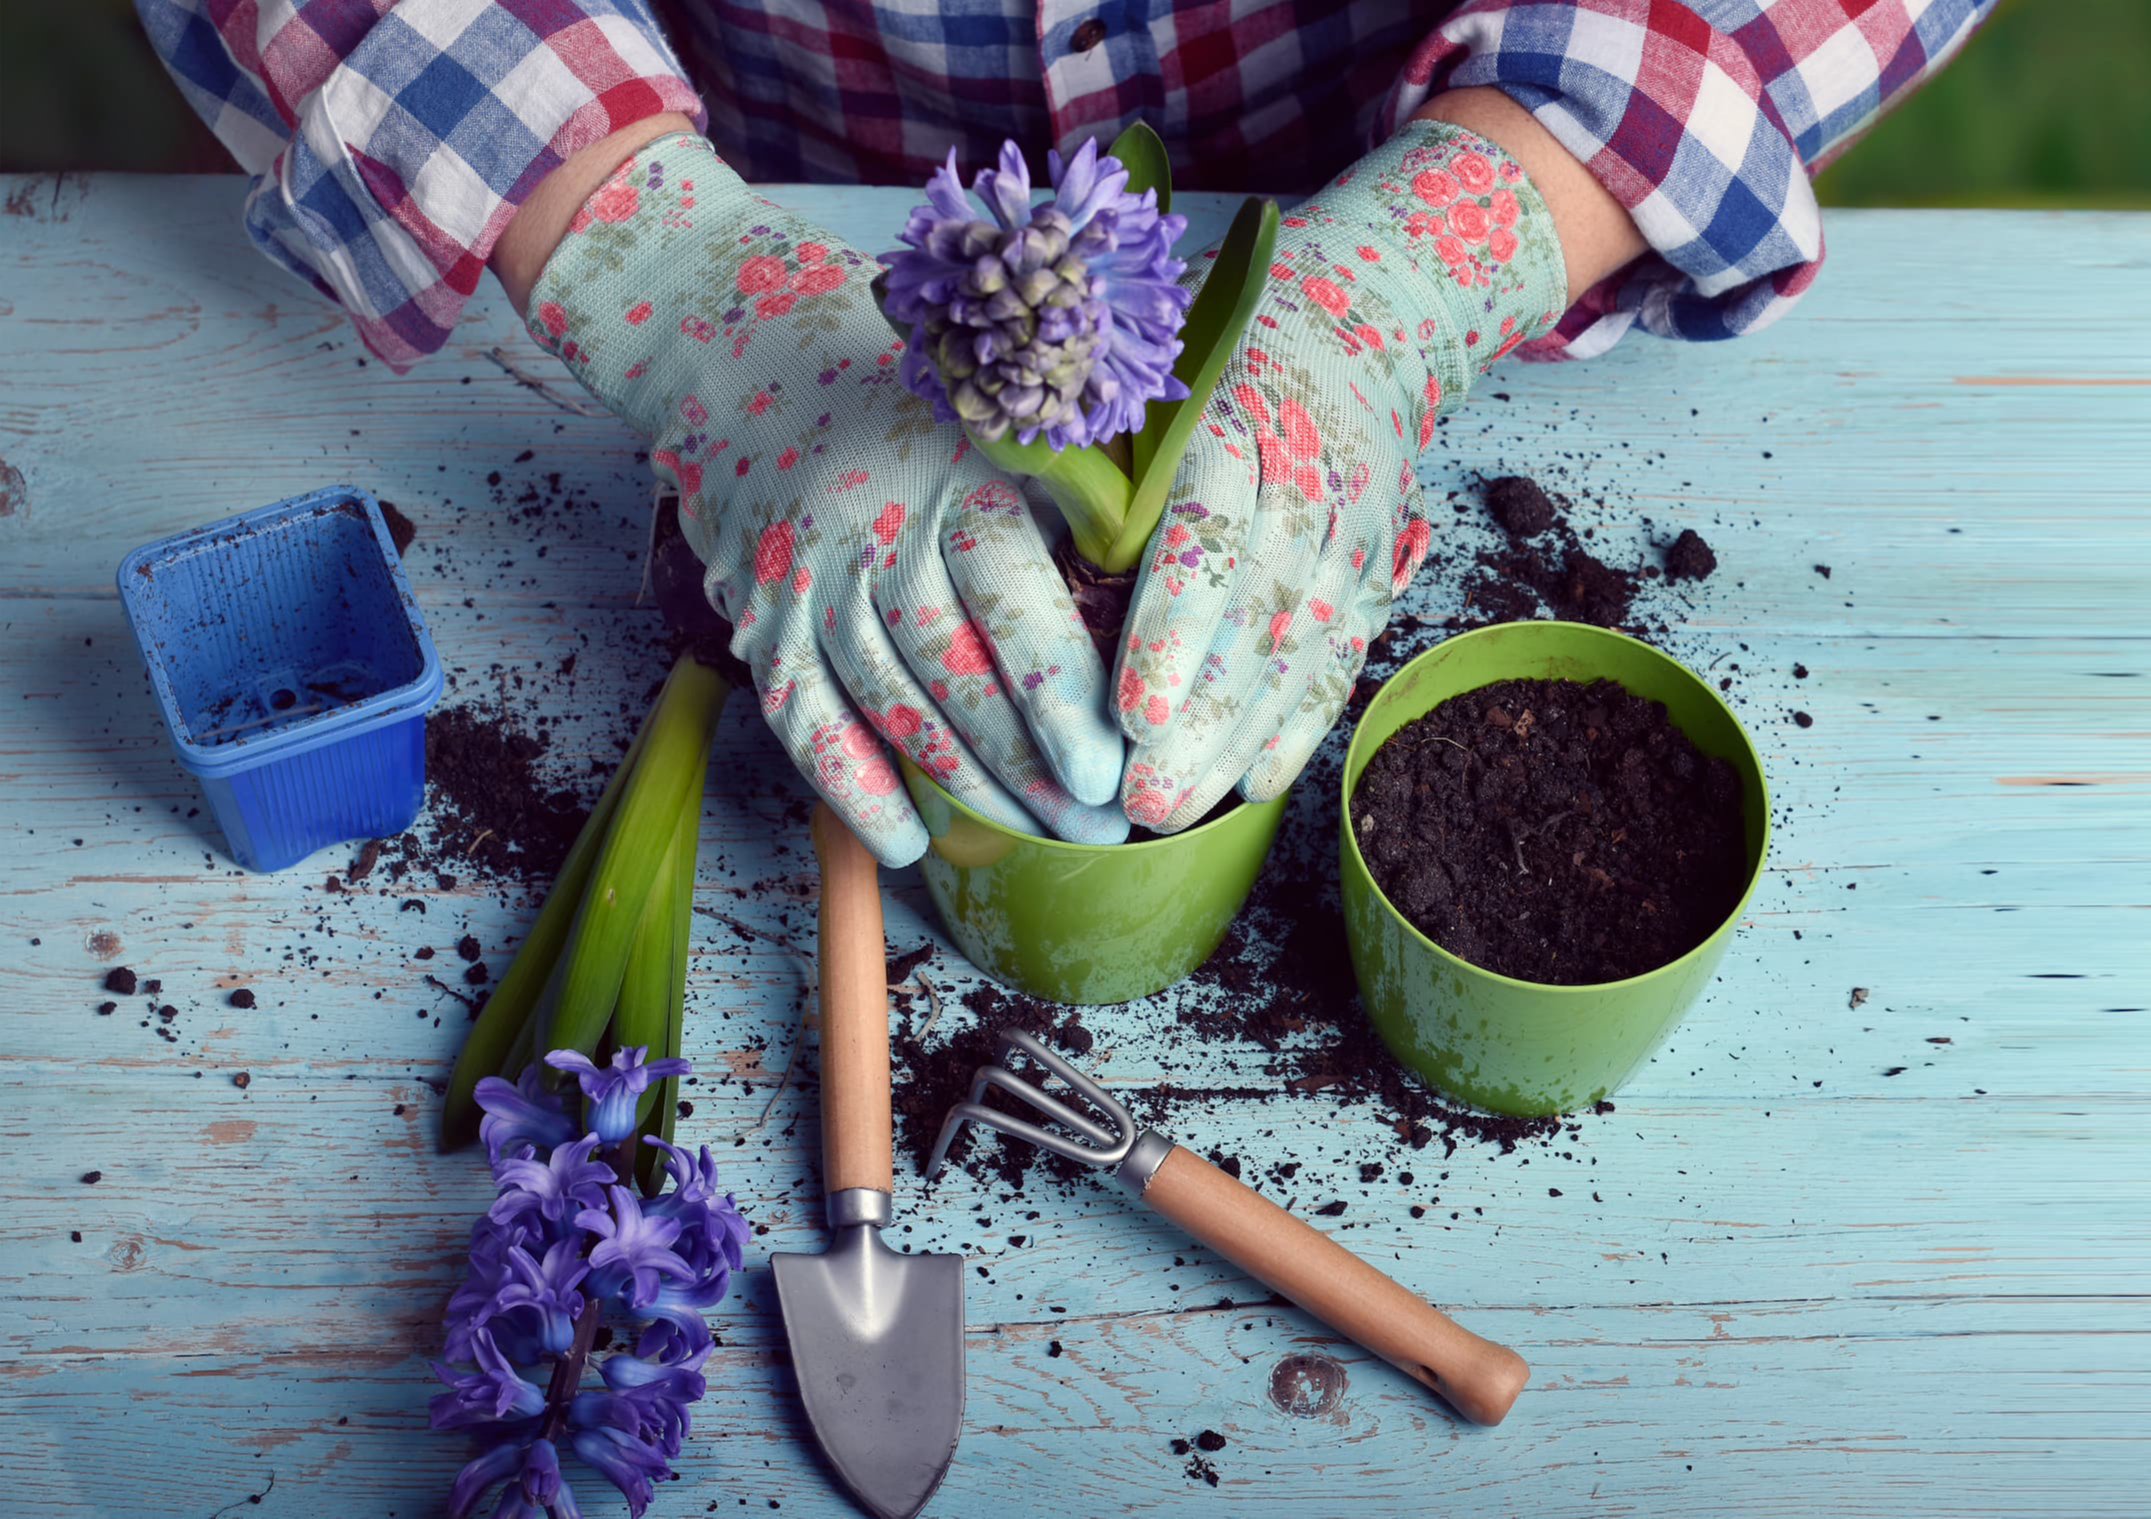 Gardening Makes us Happier and Healthier, Research Suggests 